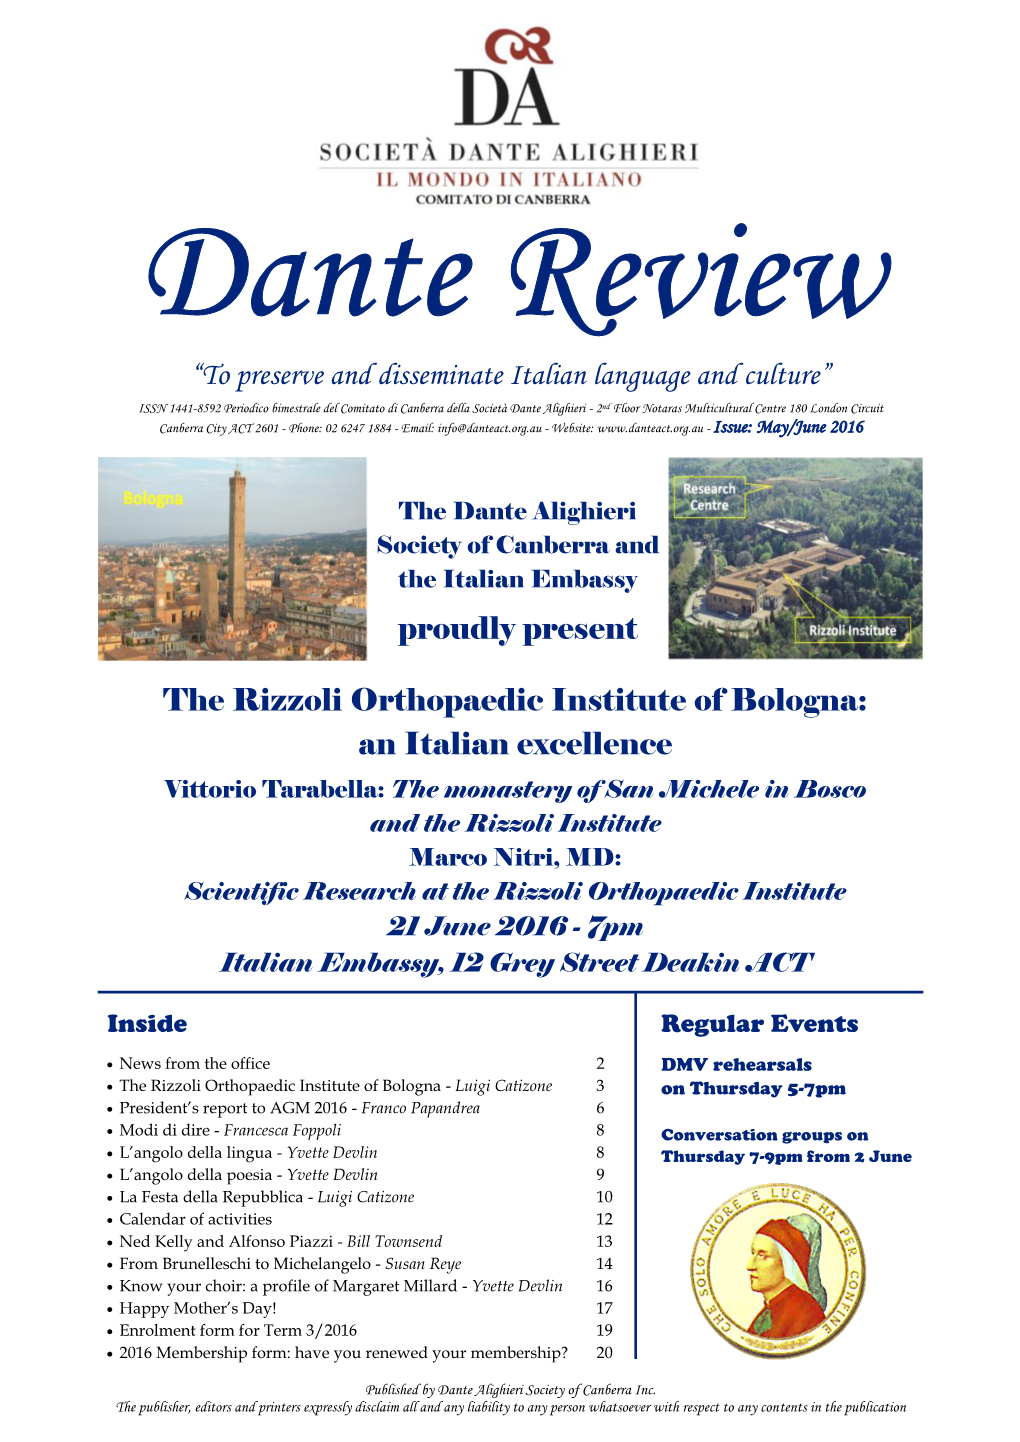 The Rizzoli Orthopaedic Institute of Bologna: an Italian Excellence